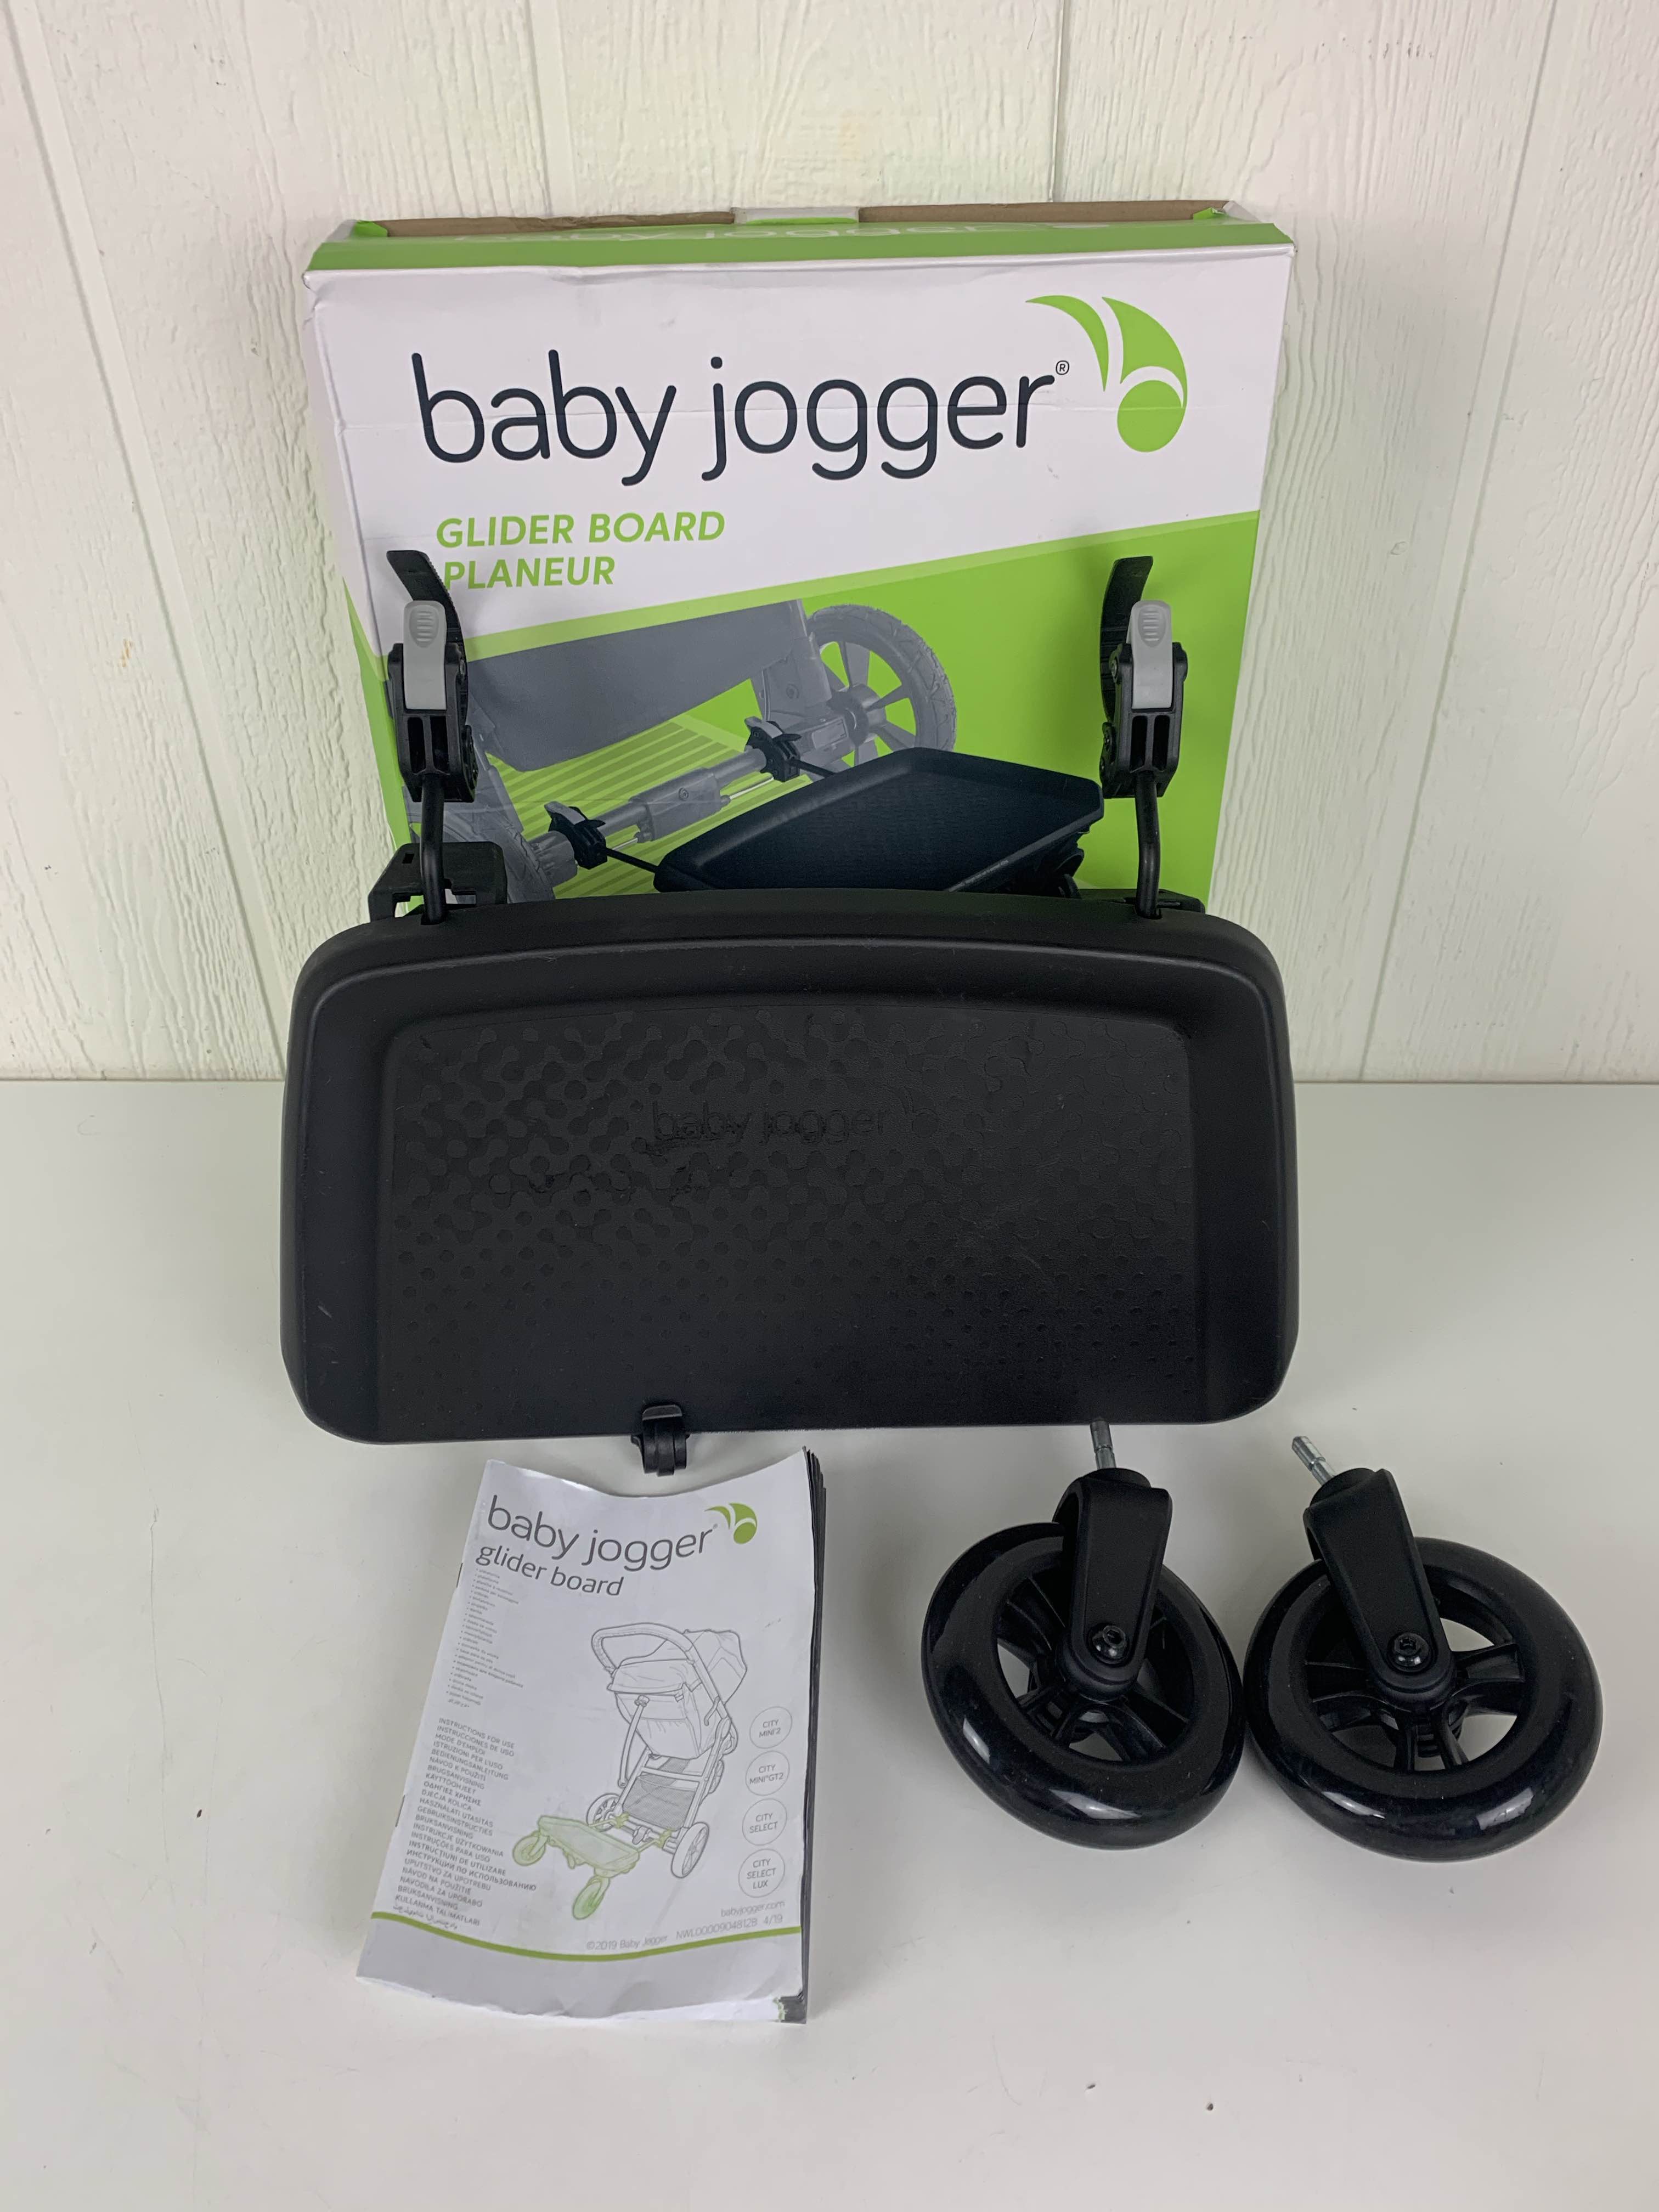 baby jogger glider board for sale